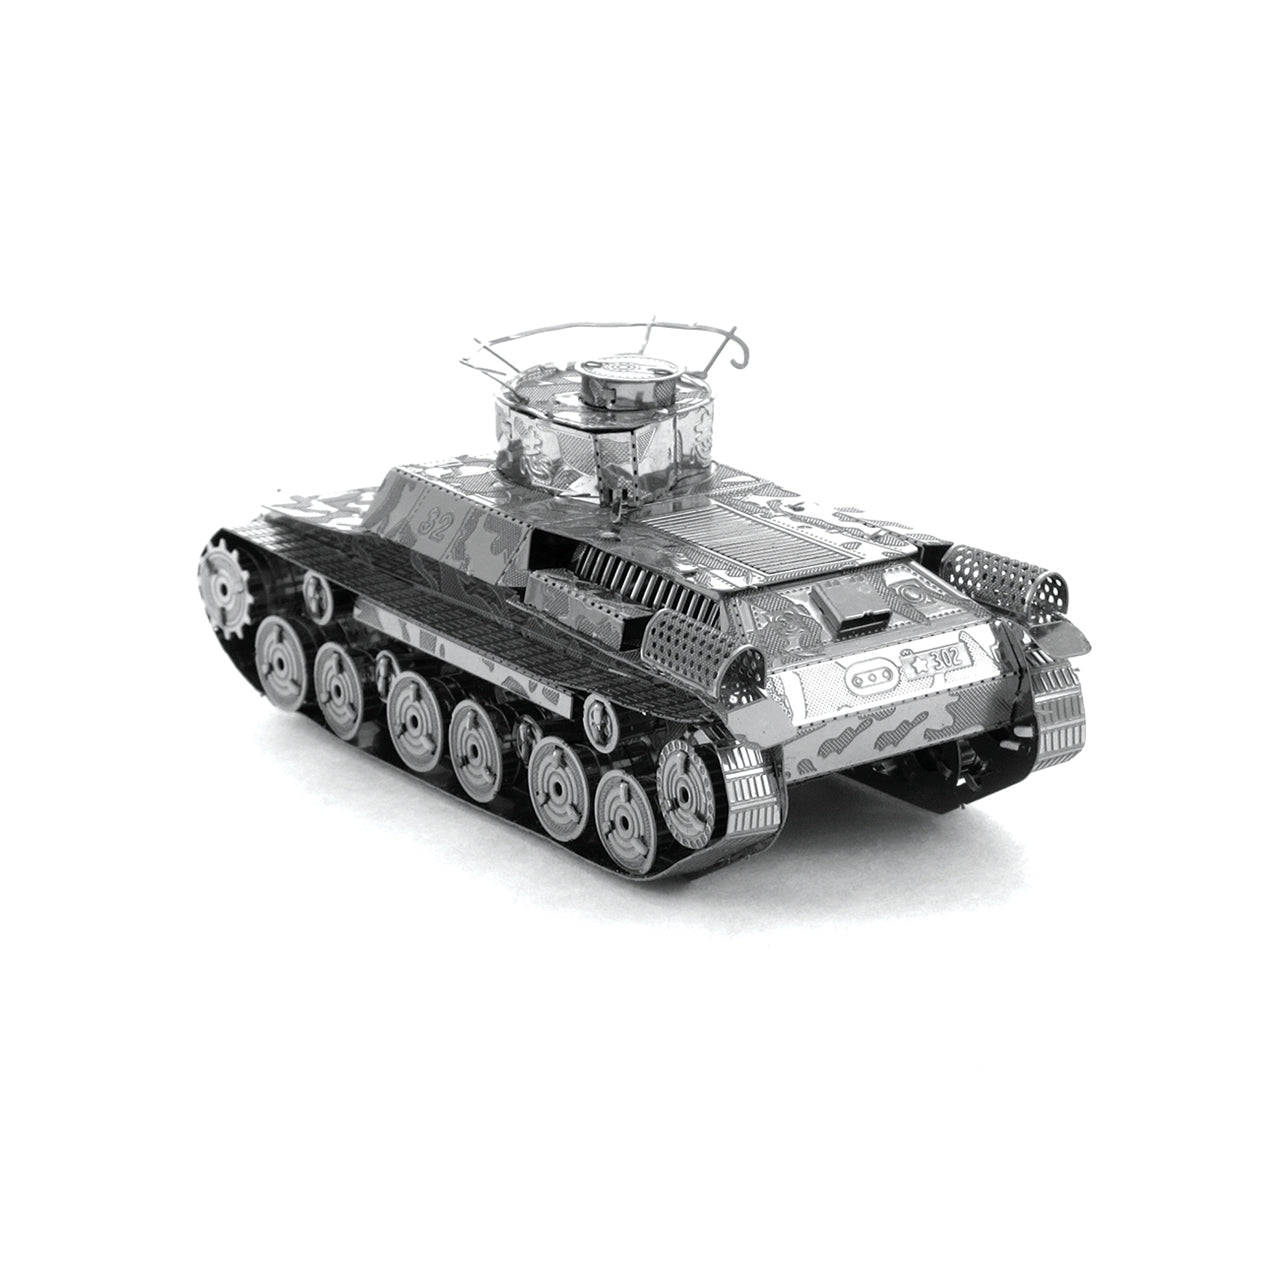 FMW202 Chi Ha Tank (Buildable) (Discontinued Model)